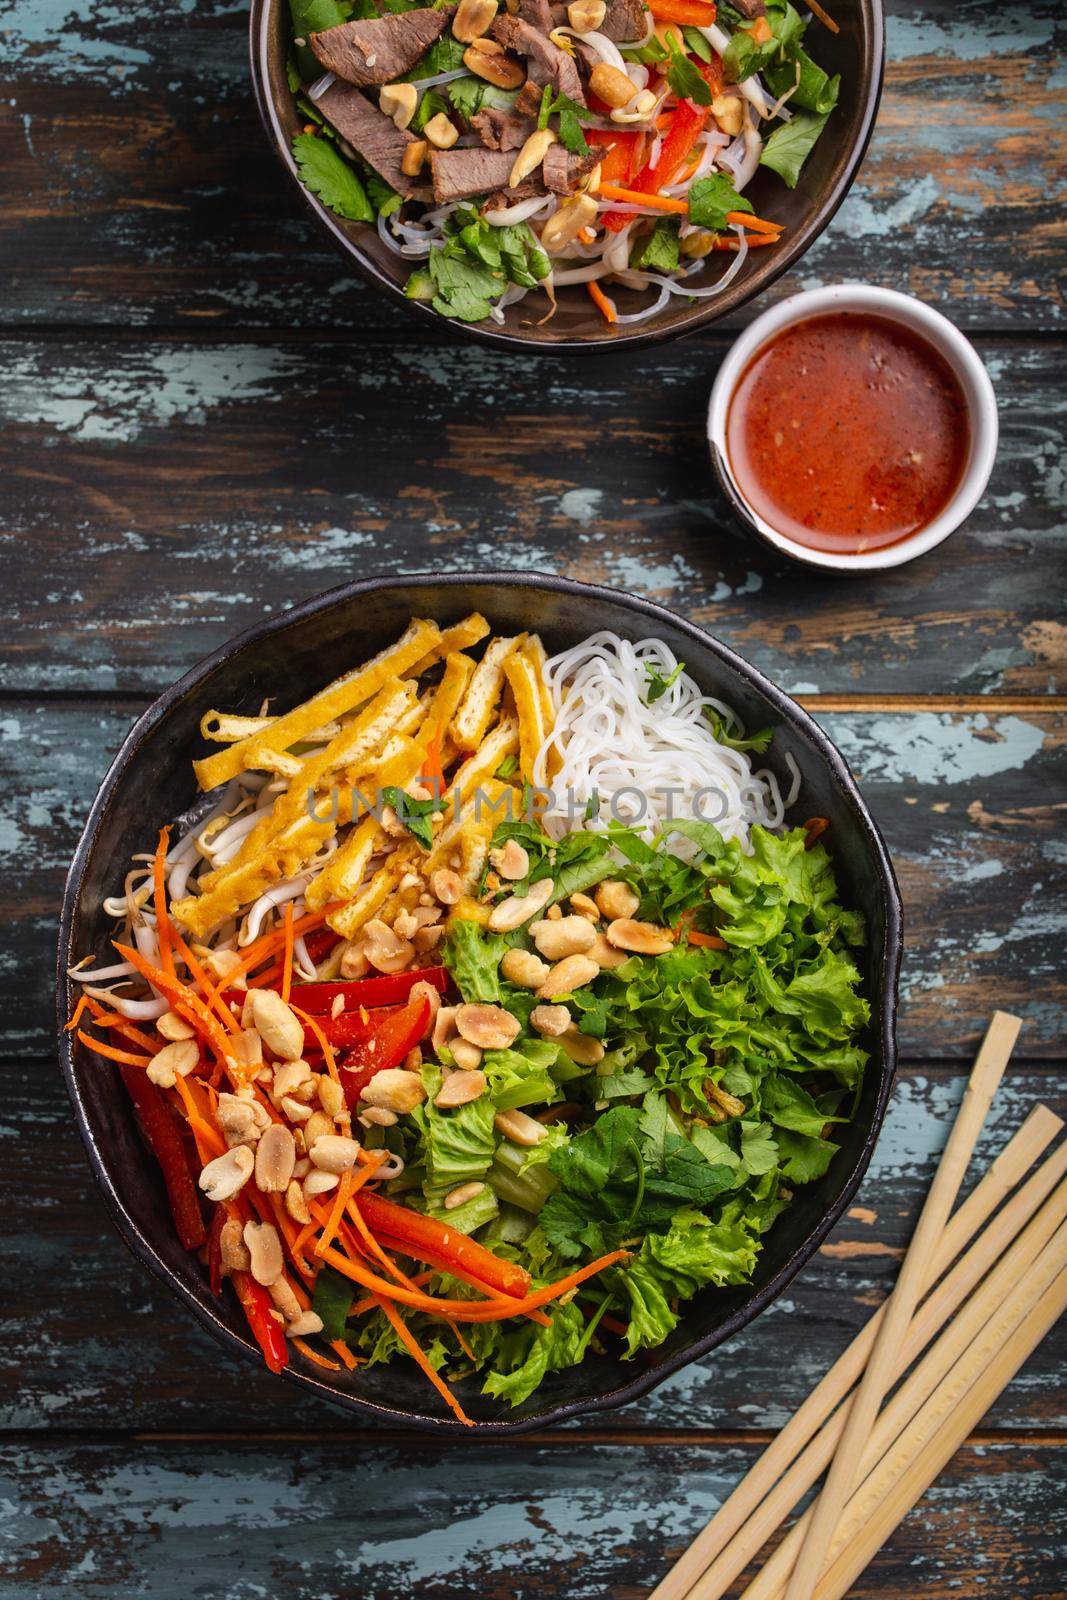 Asian, Chinese or Vietnamese style noodles salad with fresh vegetables, fried tofu and peanuts, served in rustic ceramic bowl on colorful wooden background. Healthy diet clean eating or vegan concept